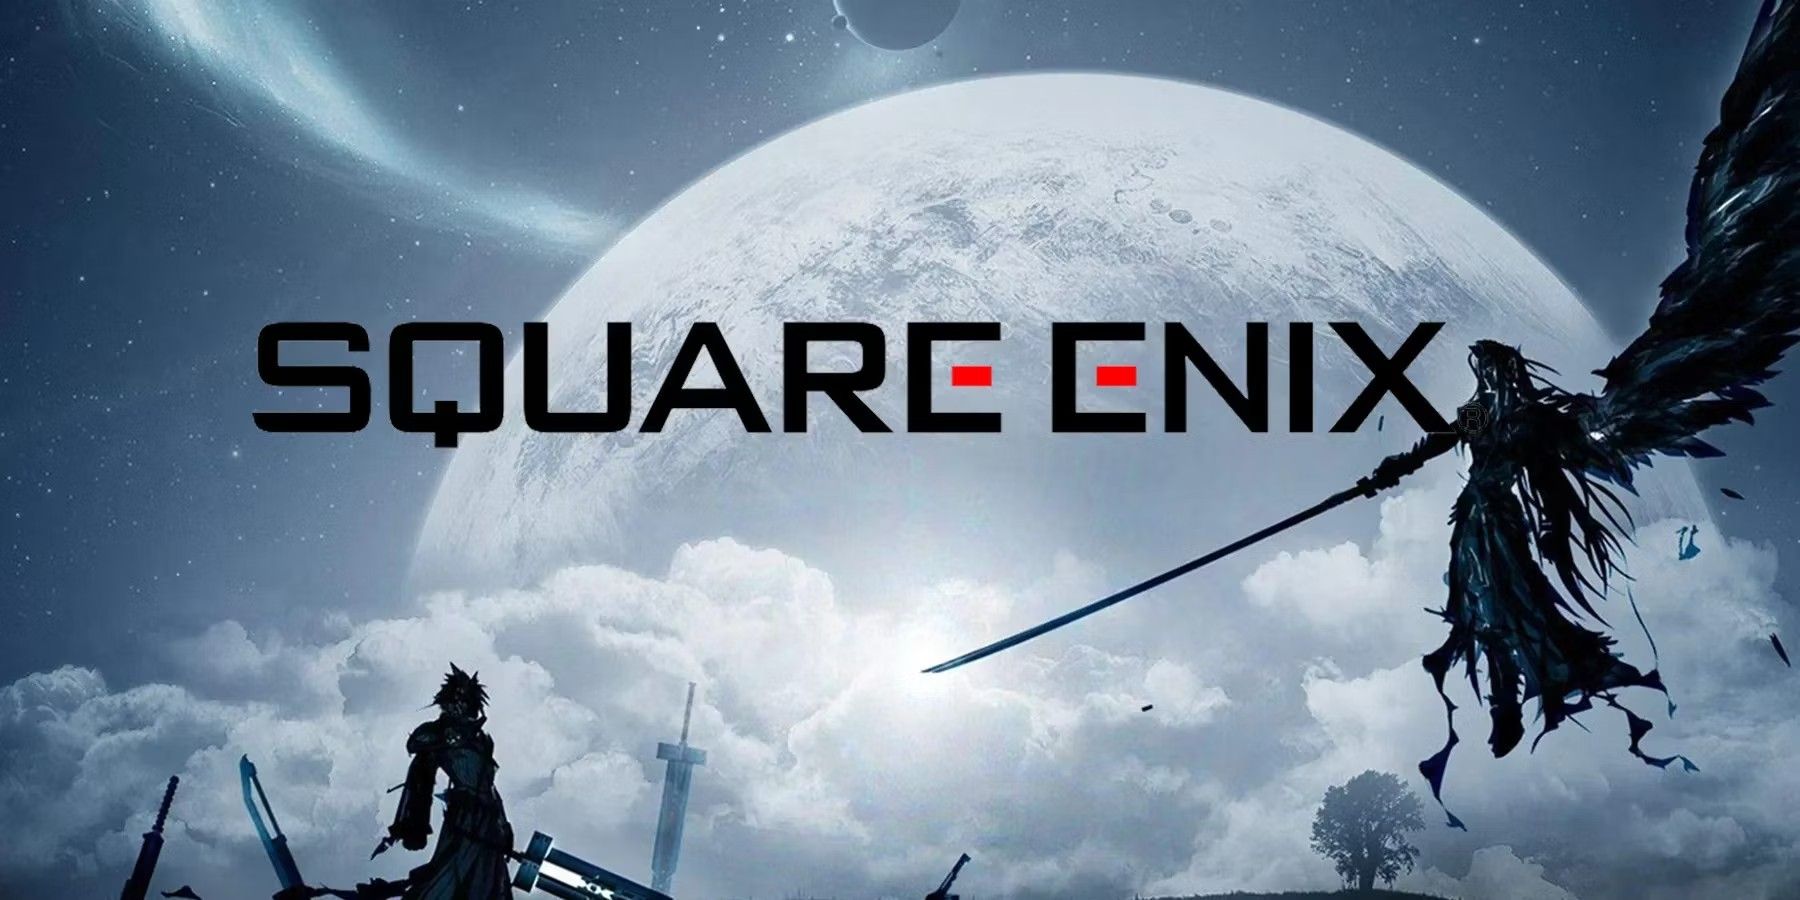 The Square Enix logo against a moon in the sky